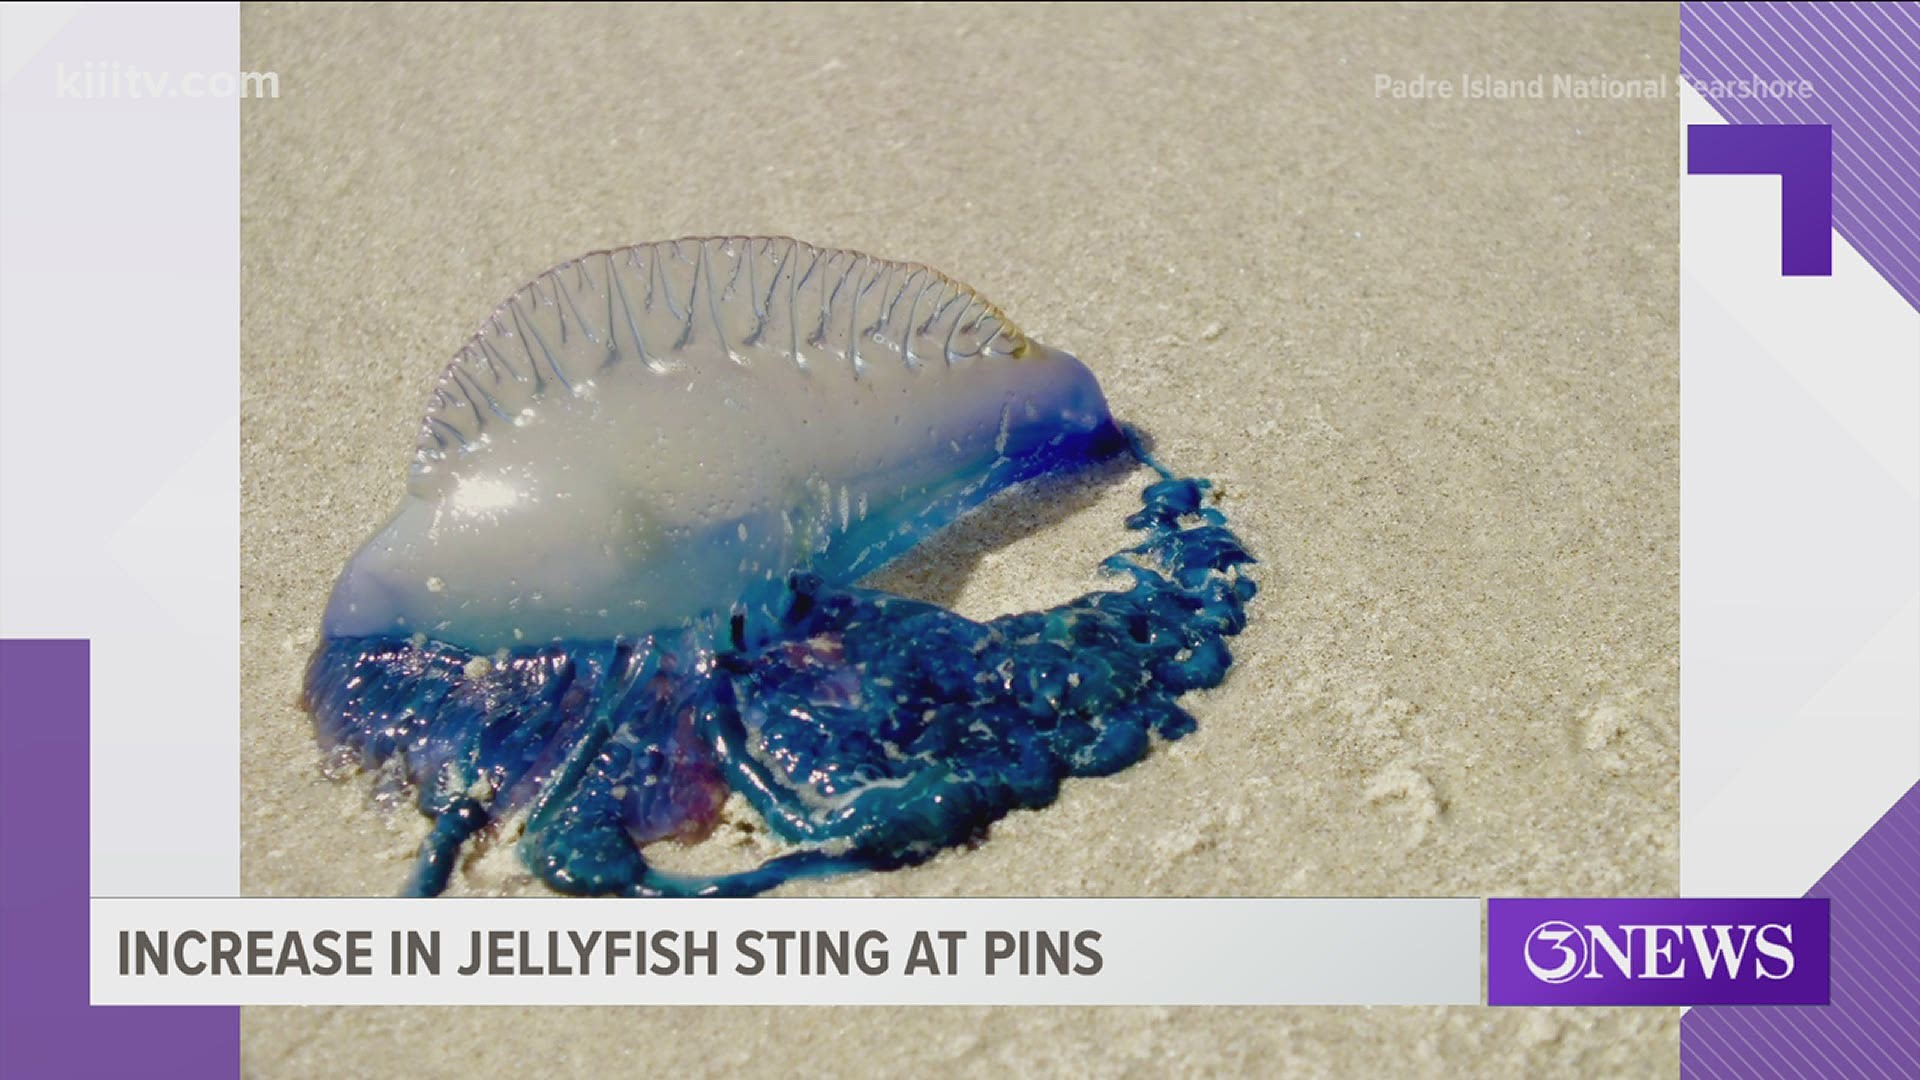 With limited services at PINS and an increase in jellyfish, officials say it is best to always be prepared when visiting the beach.